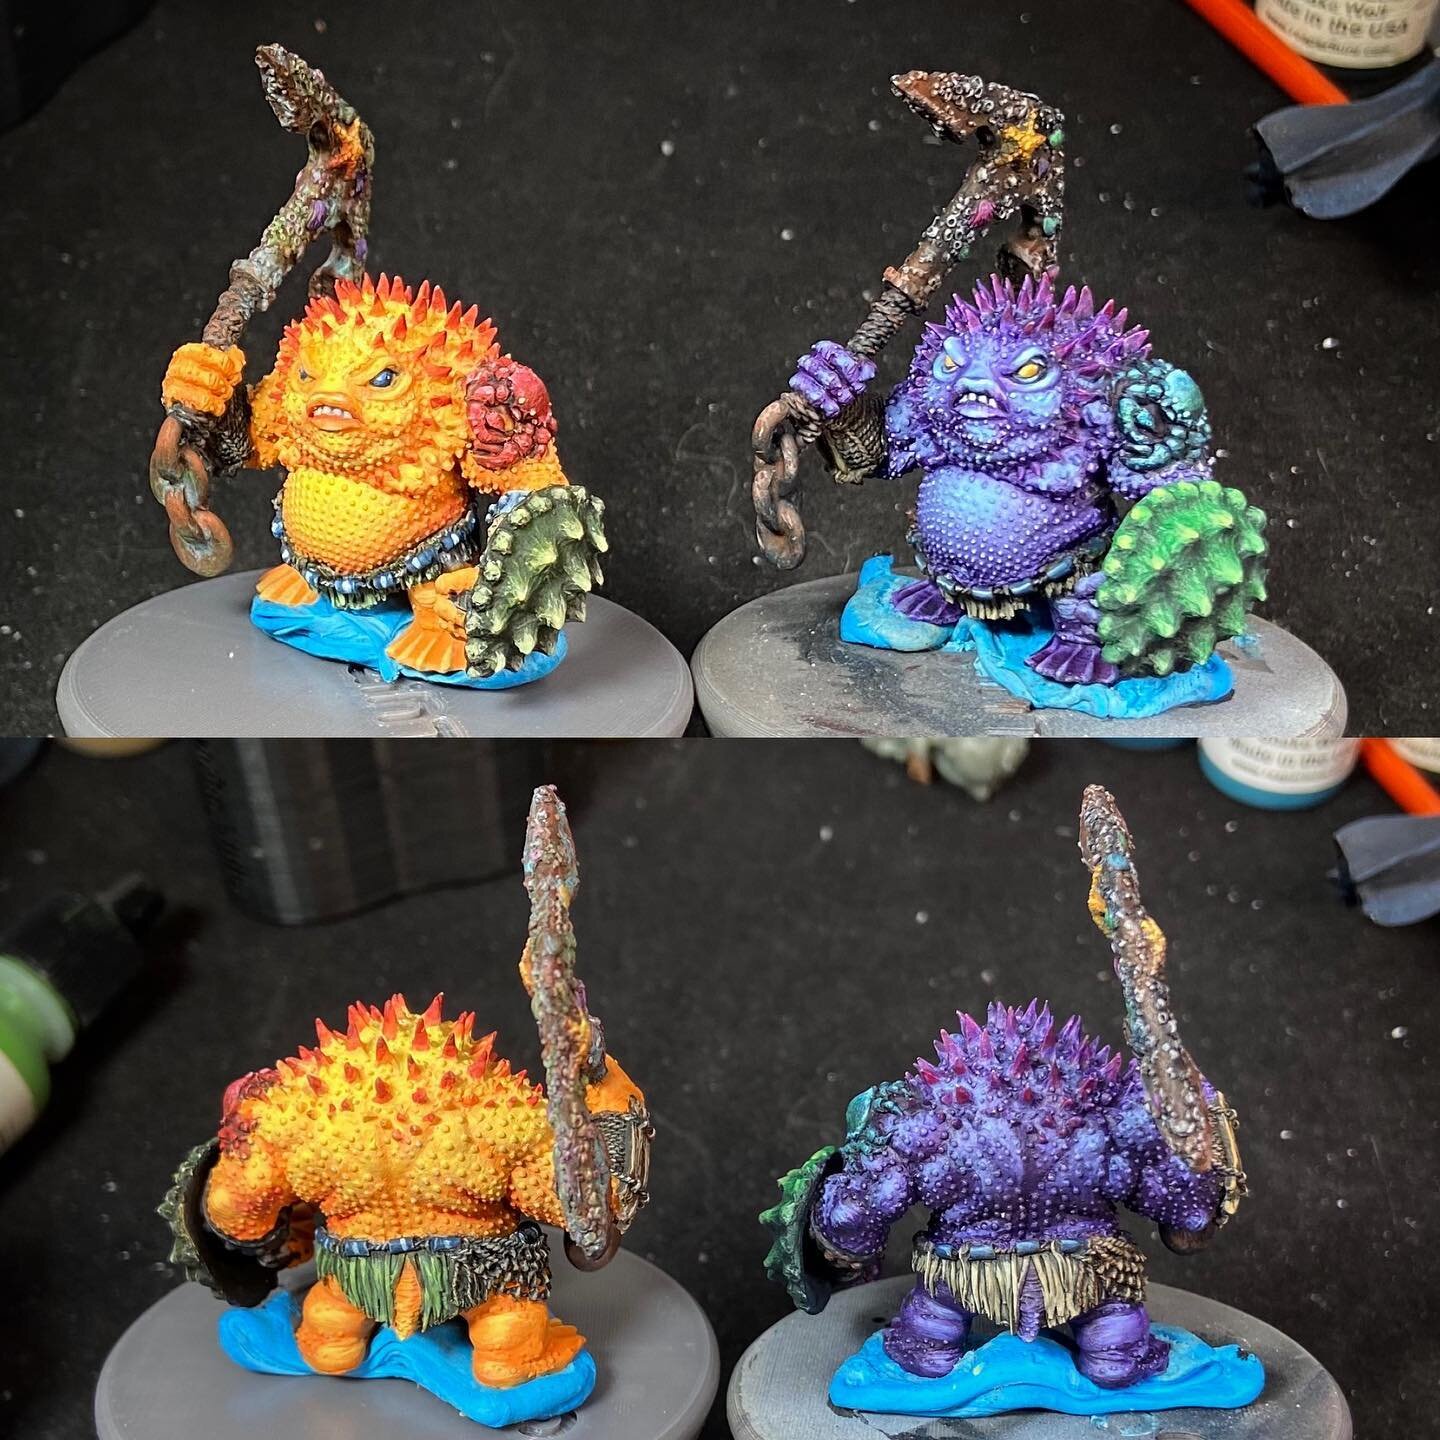 Blowfish Boys are done! Which color scheme is your favorite? #nofilter 🐡 Now it&rsquo;s time for basing. 
.
.
.
#miniaturemonday&nbsp;#miniaturefigures&nbsp;#blowfish&nbsp;#zabavka&nbsp;#zabavkaworkshop&nbsp;#twitch&nbsp;#twitchstreamer&nbsp;#mocham